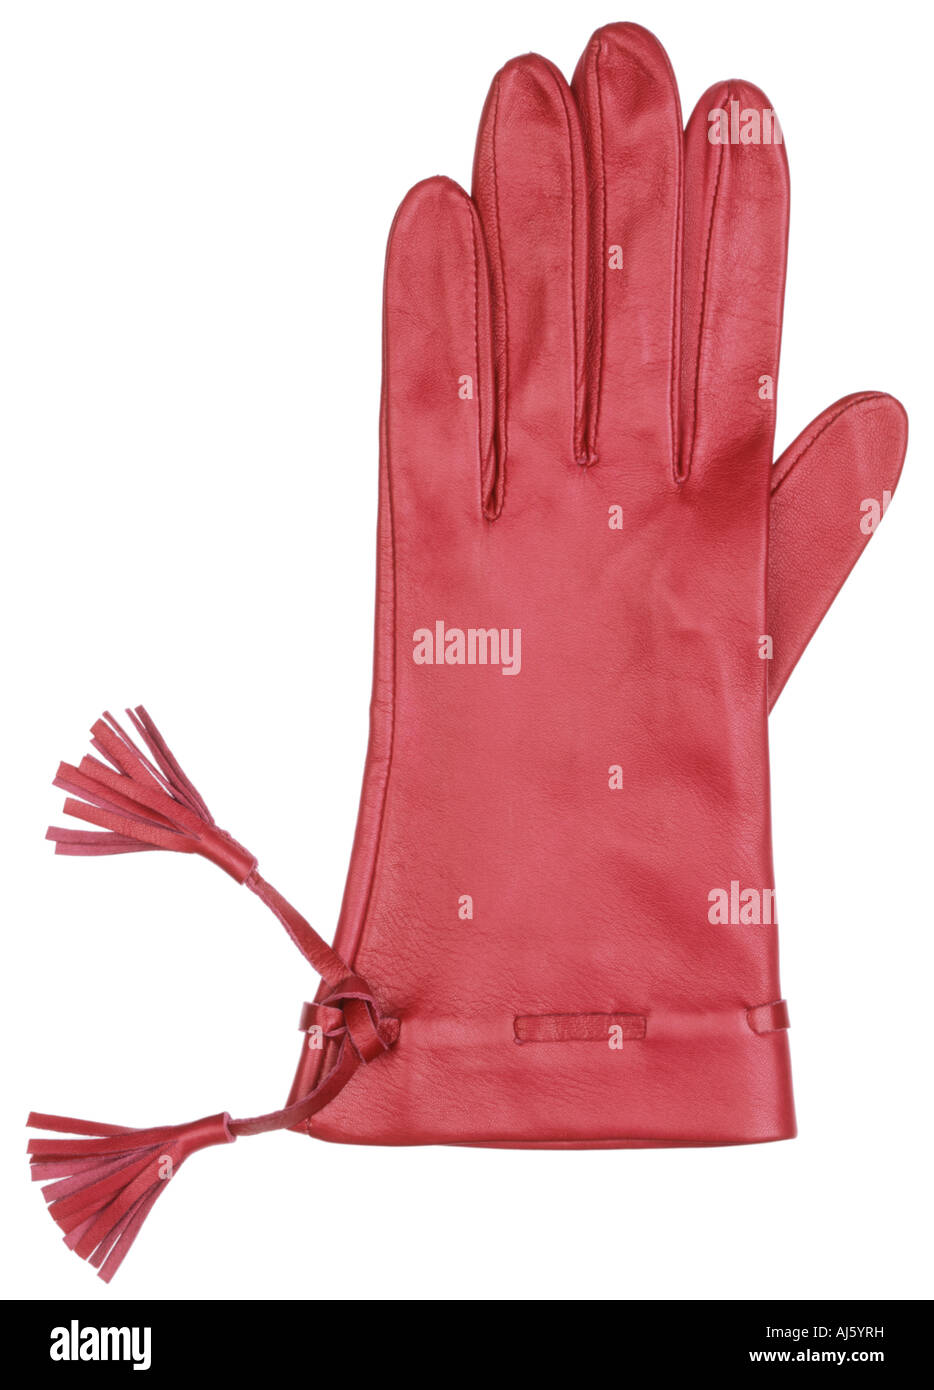 Red leather glove with tassles Stock Photo